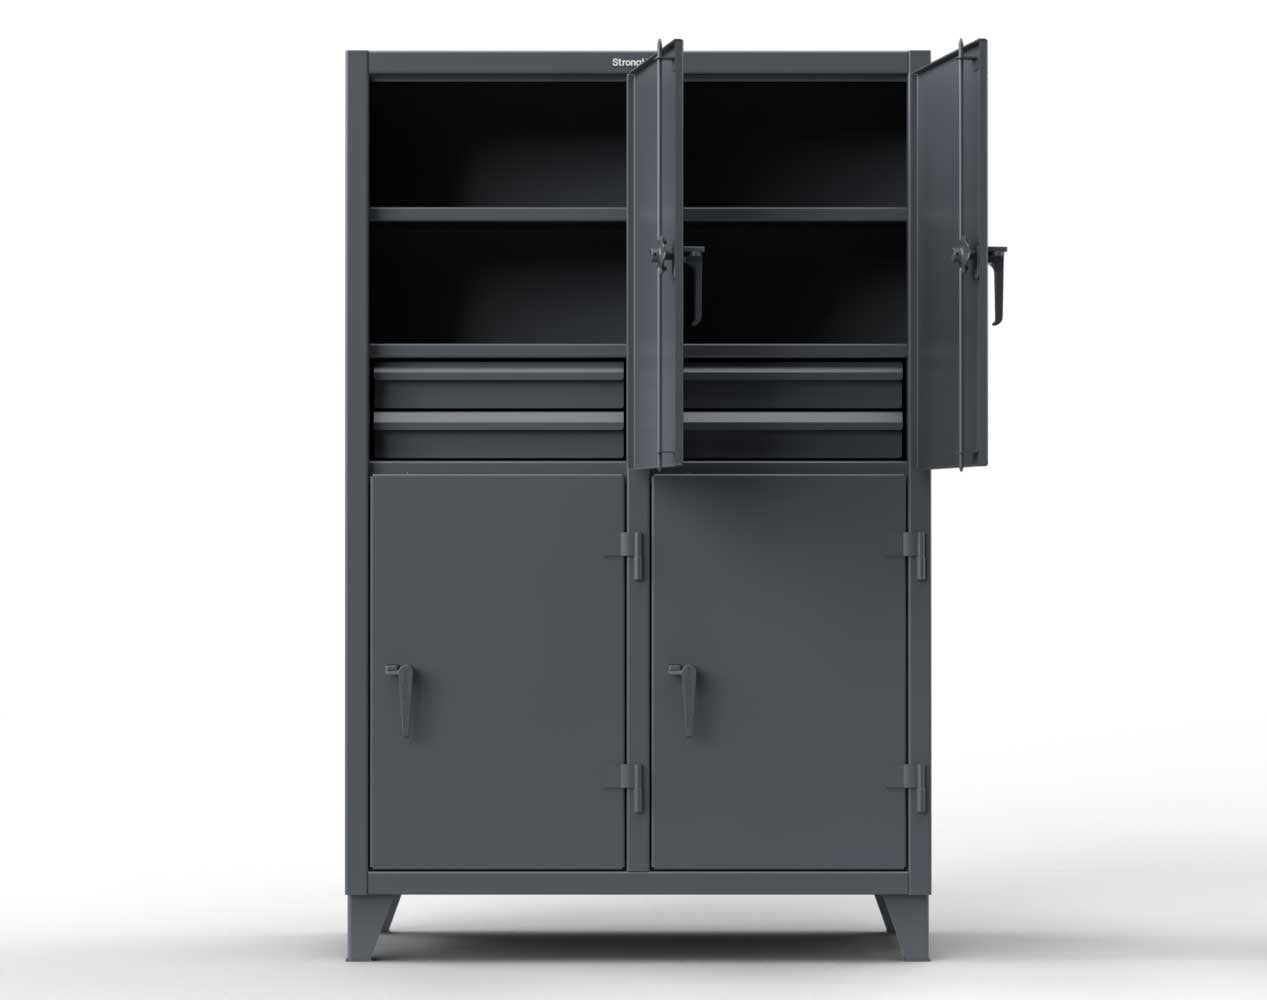 Extreme Duty 12 GA Double-Tier Locker with 8 Compartments, 12 Shelves, 16 Drawers - 98 in. W x 24in. D x 78 in. H